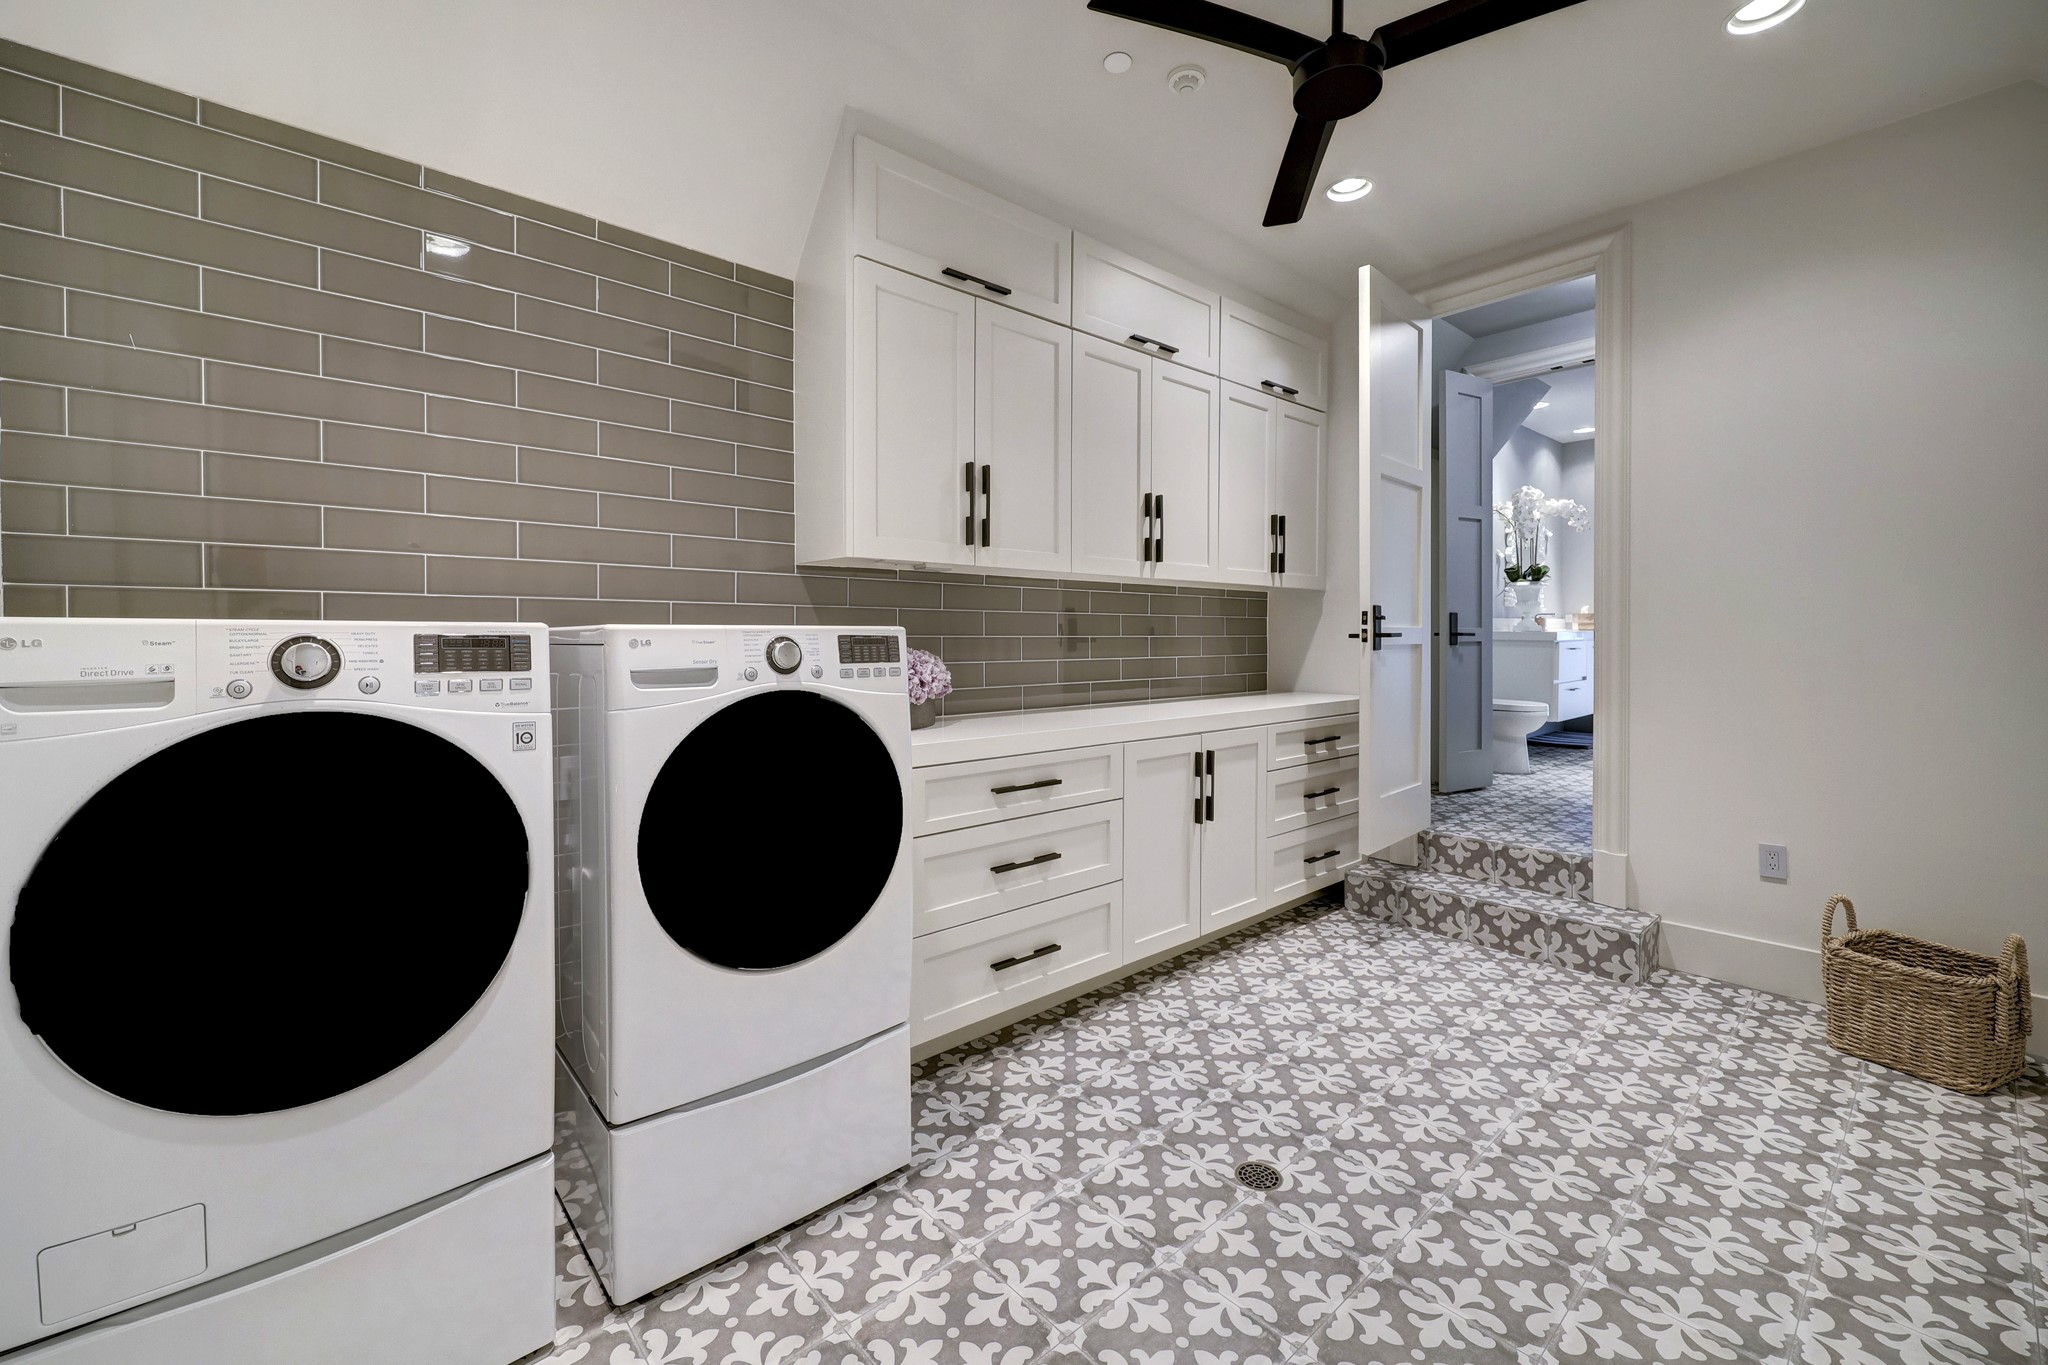 A secondary utility room leads you to the guest quarters of the home, one of the multiple ways to access the guest quarters. Utility room has an LG washer and dryer and custom built in cabinetry for storage.